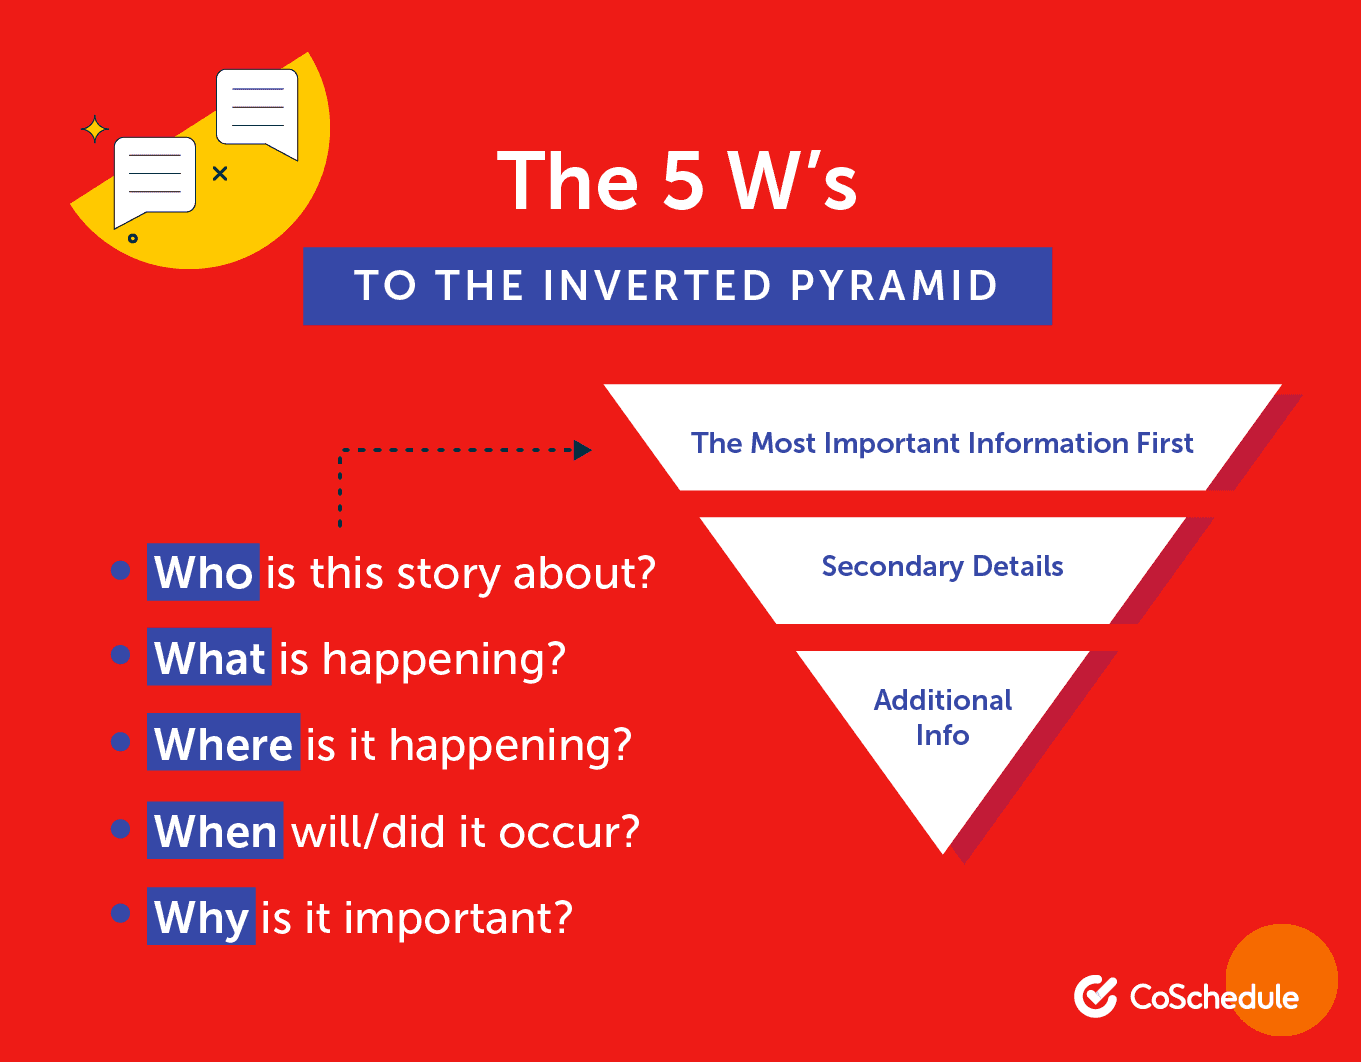 The 5 W's of the inverted pyramid press release